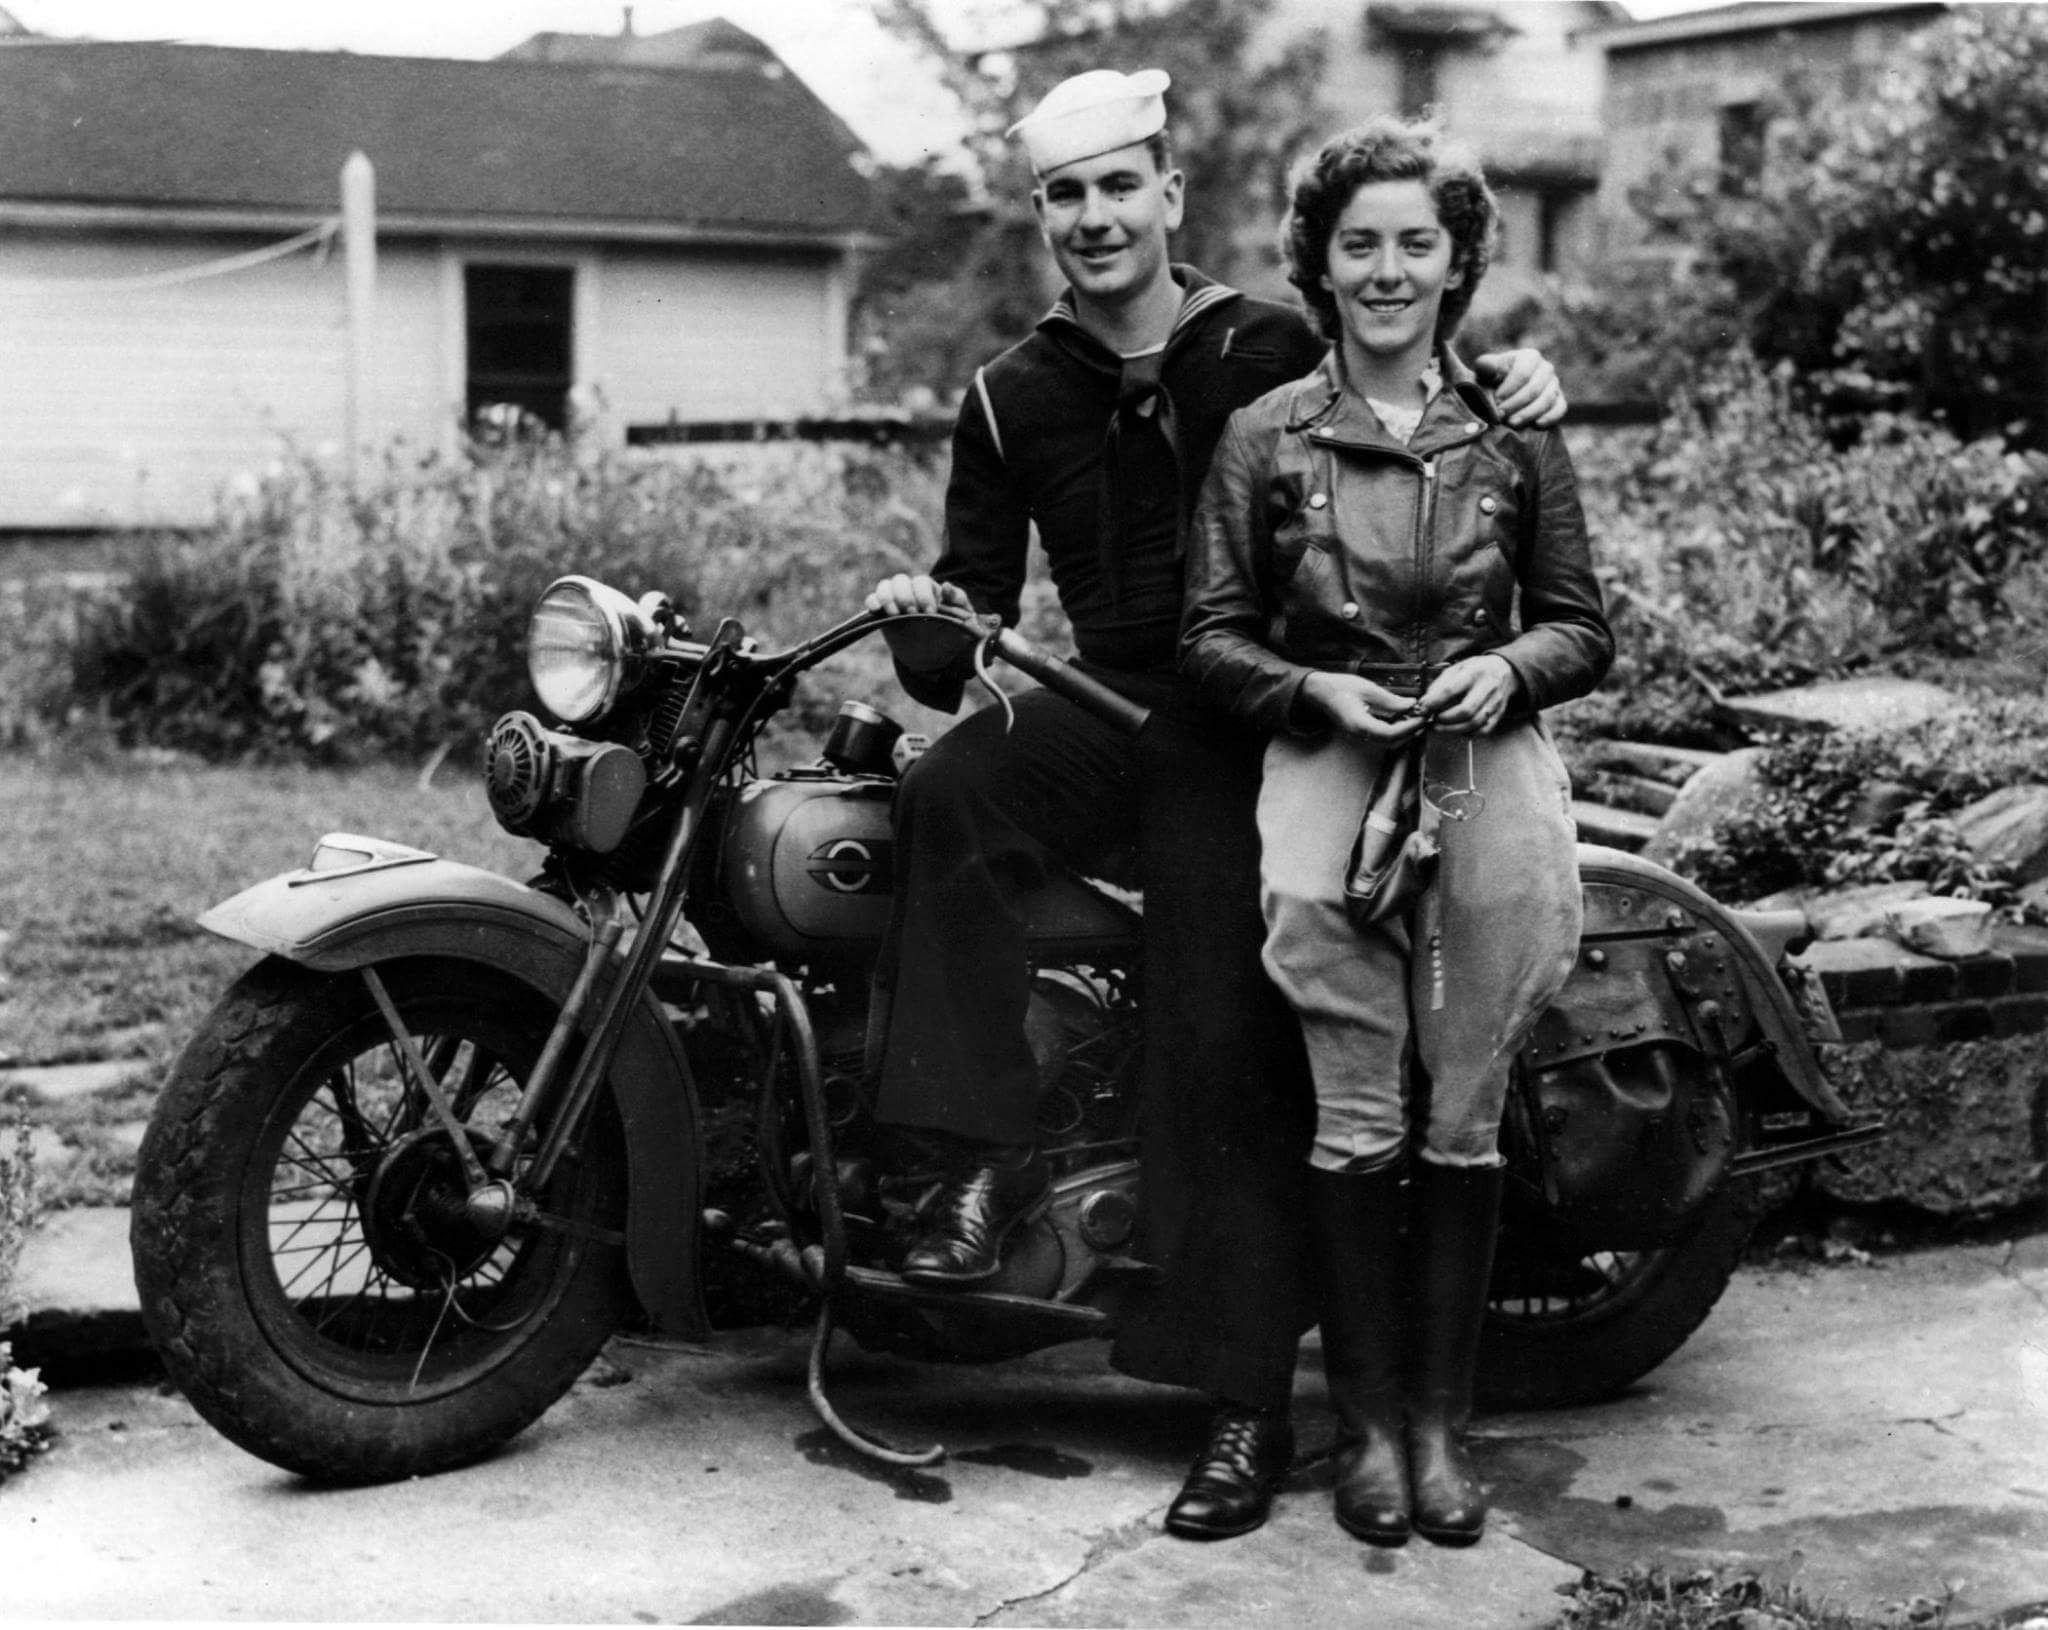 My grandparents in the 1950s with one of their motorcycles